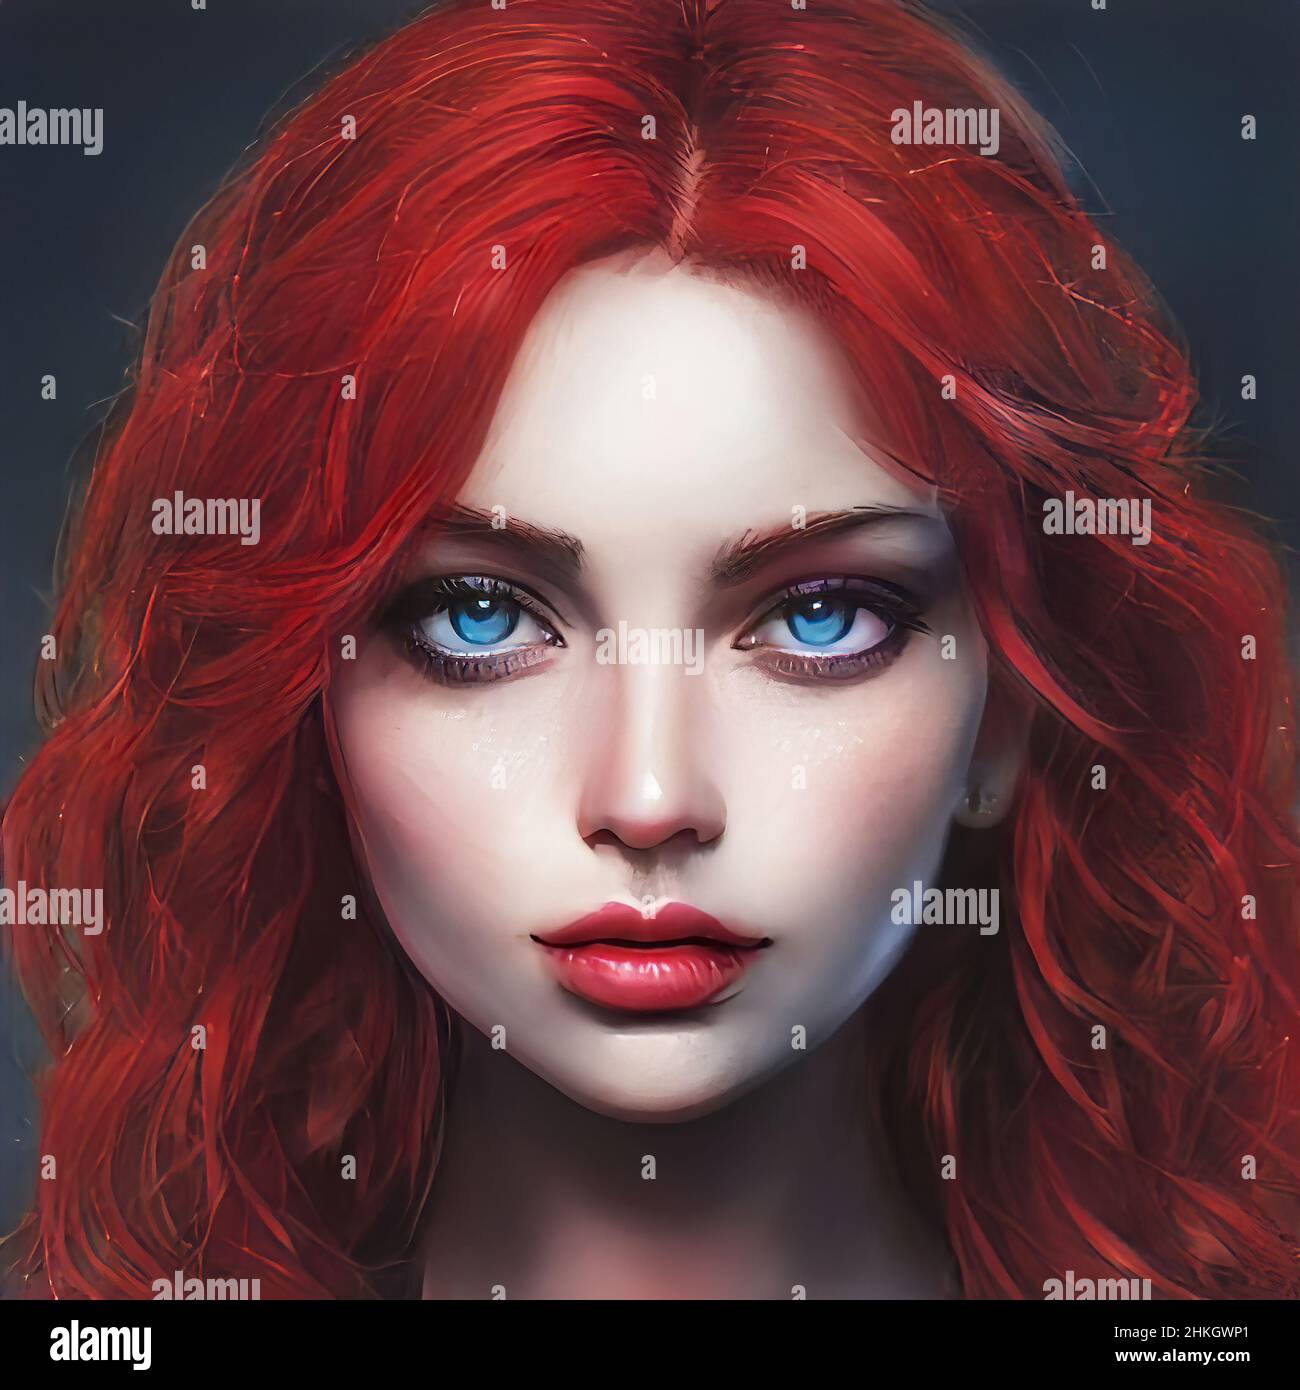 Red-haired beauty woman portrait close-up. Bright red hair, intense hair  coloring. Redhead curly hair. Beauty makeup face. Illustration Stock Photo  - Alamy